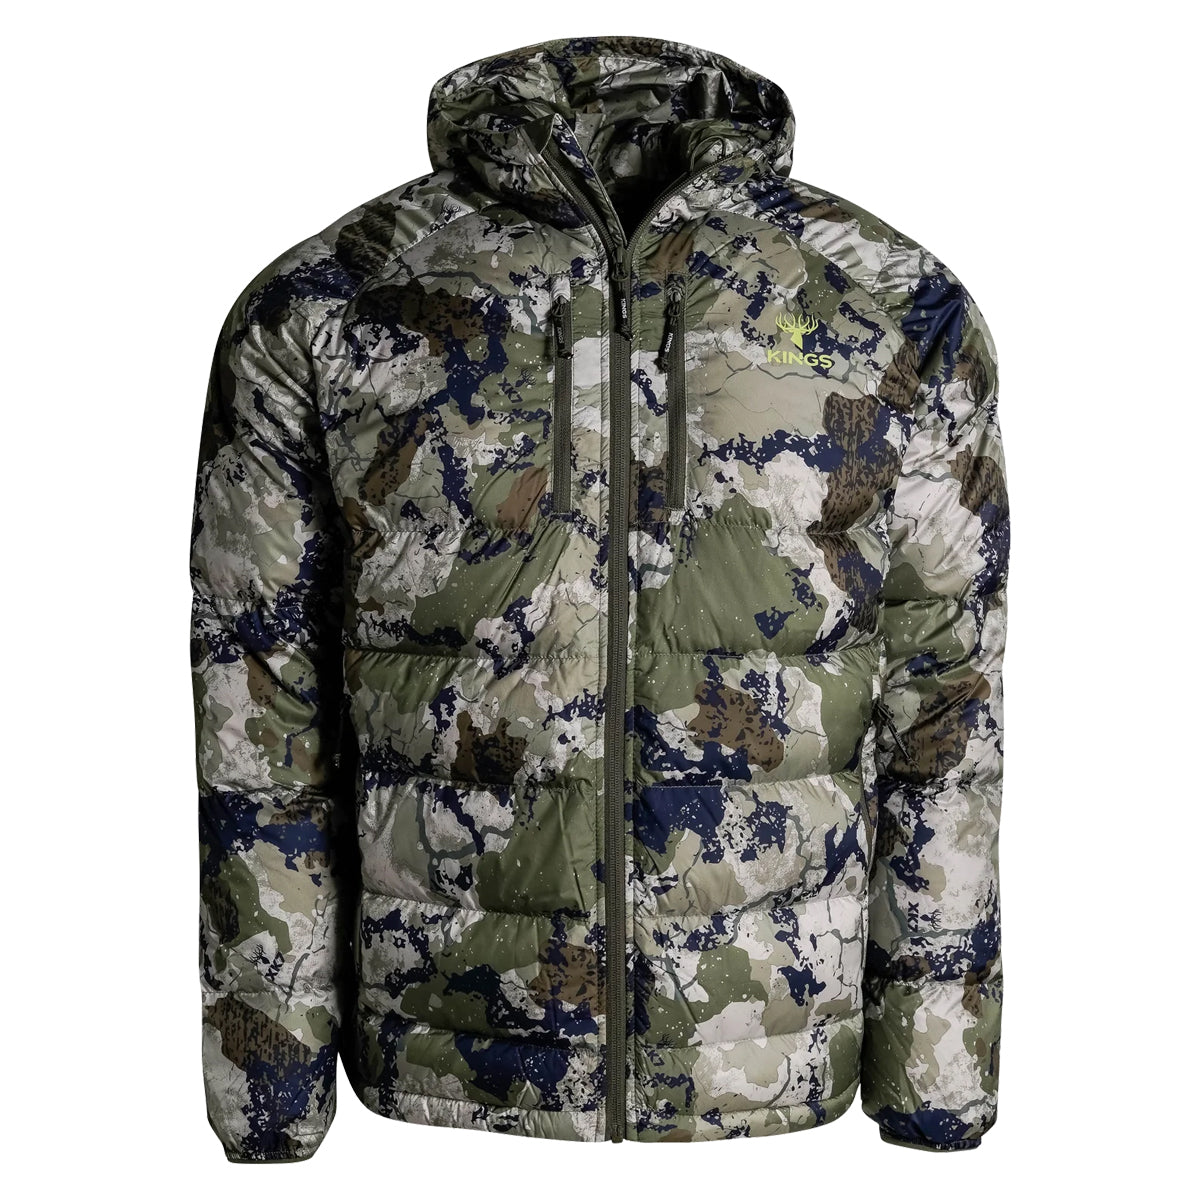 King's XKG Down Transition Jacket in  by GOHUNT | King's - GOHUNT Shop